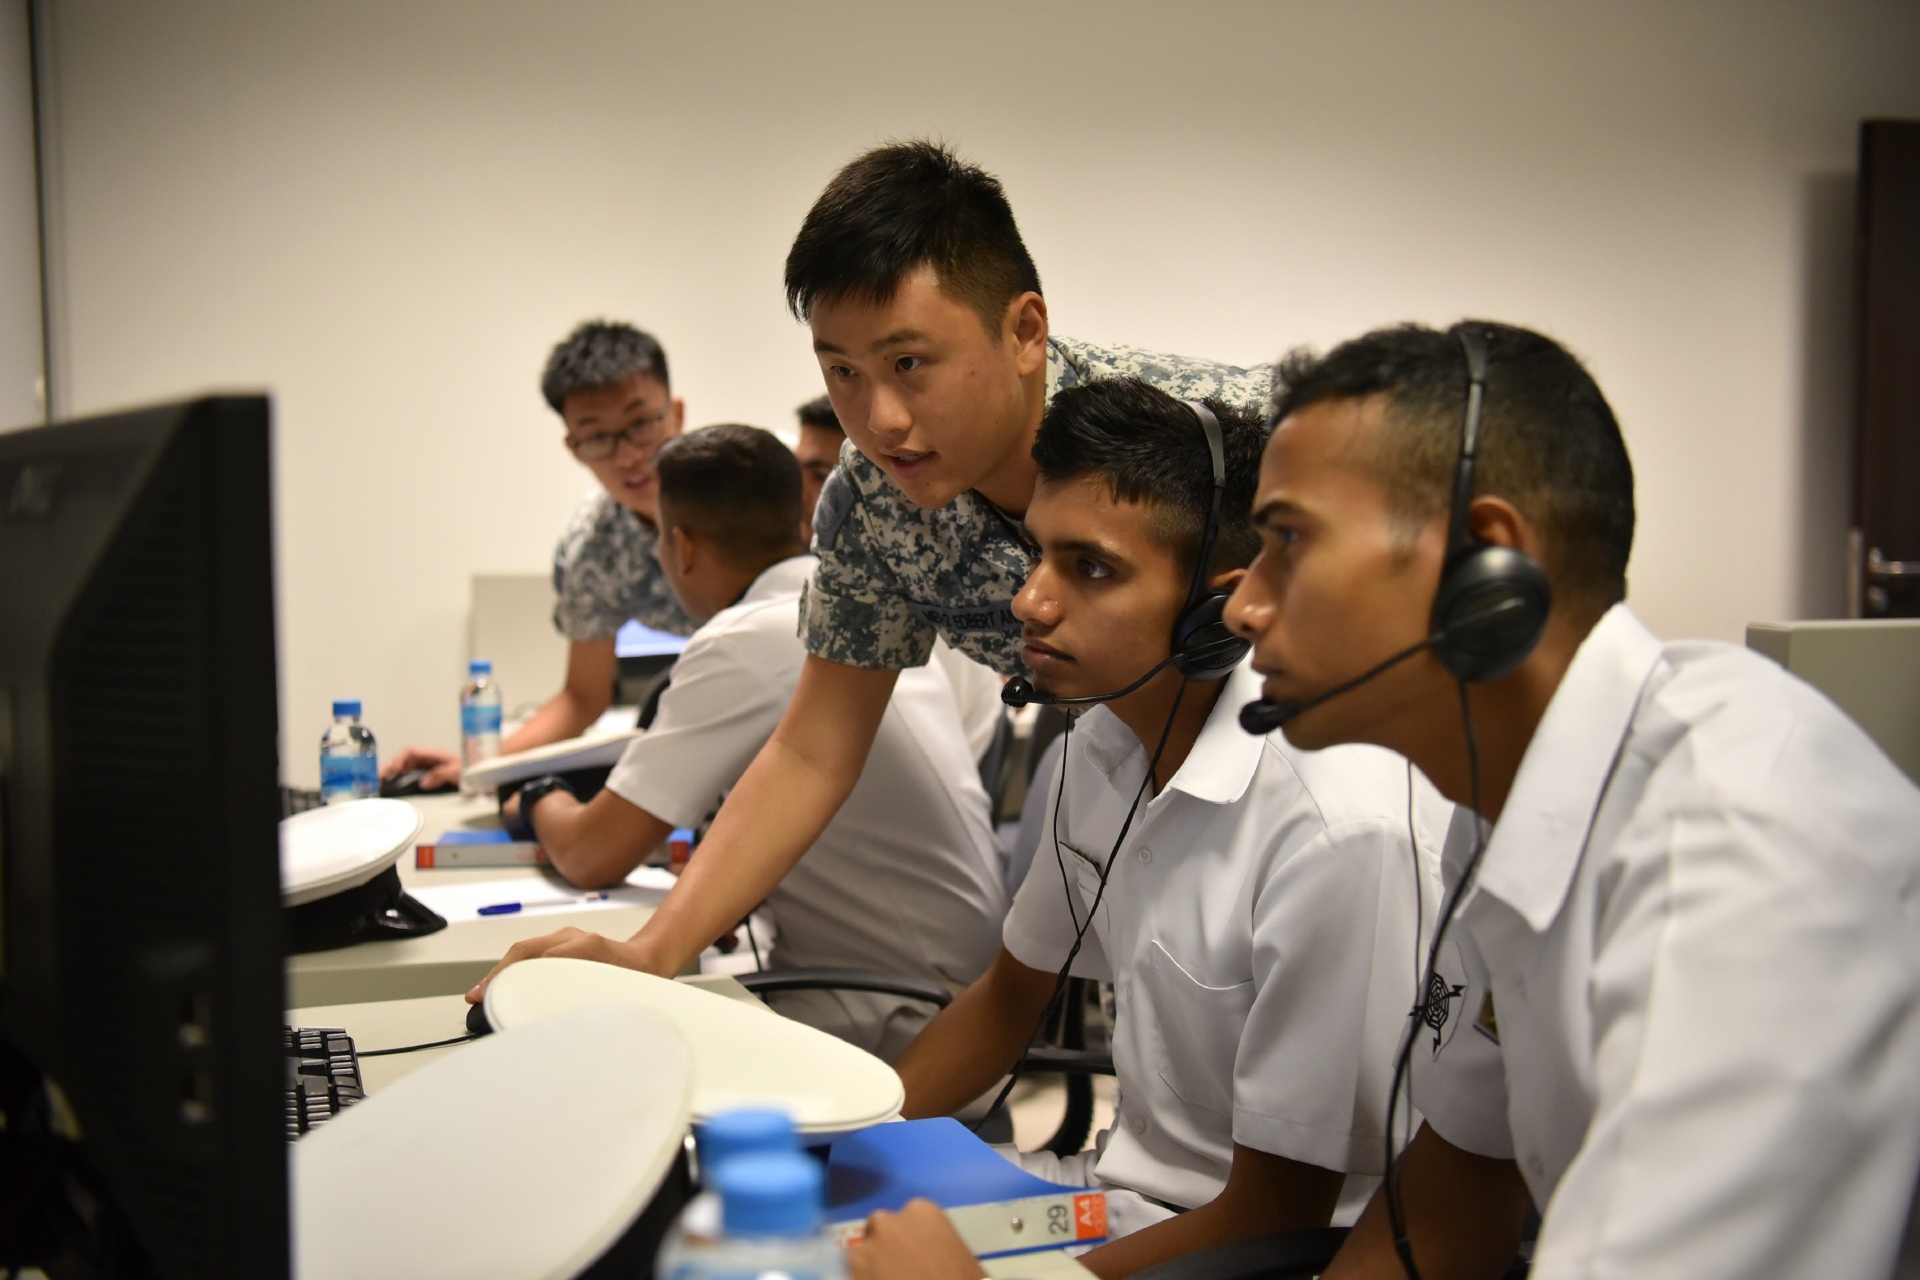 RSN personnel working alongside their IN counterparts at the Naval Tactical Trainer in Changi Naval Base.